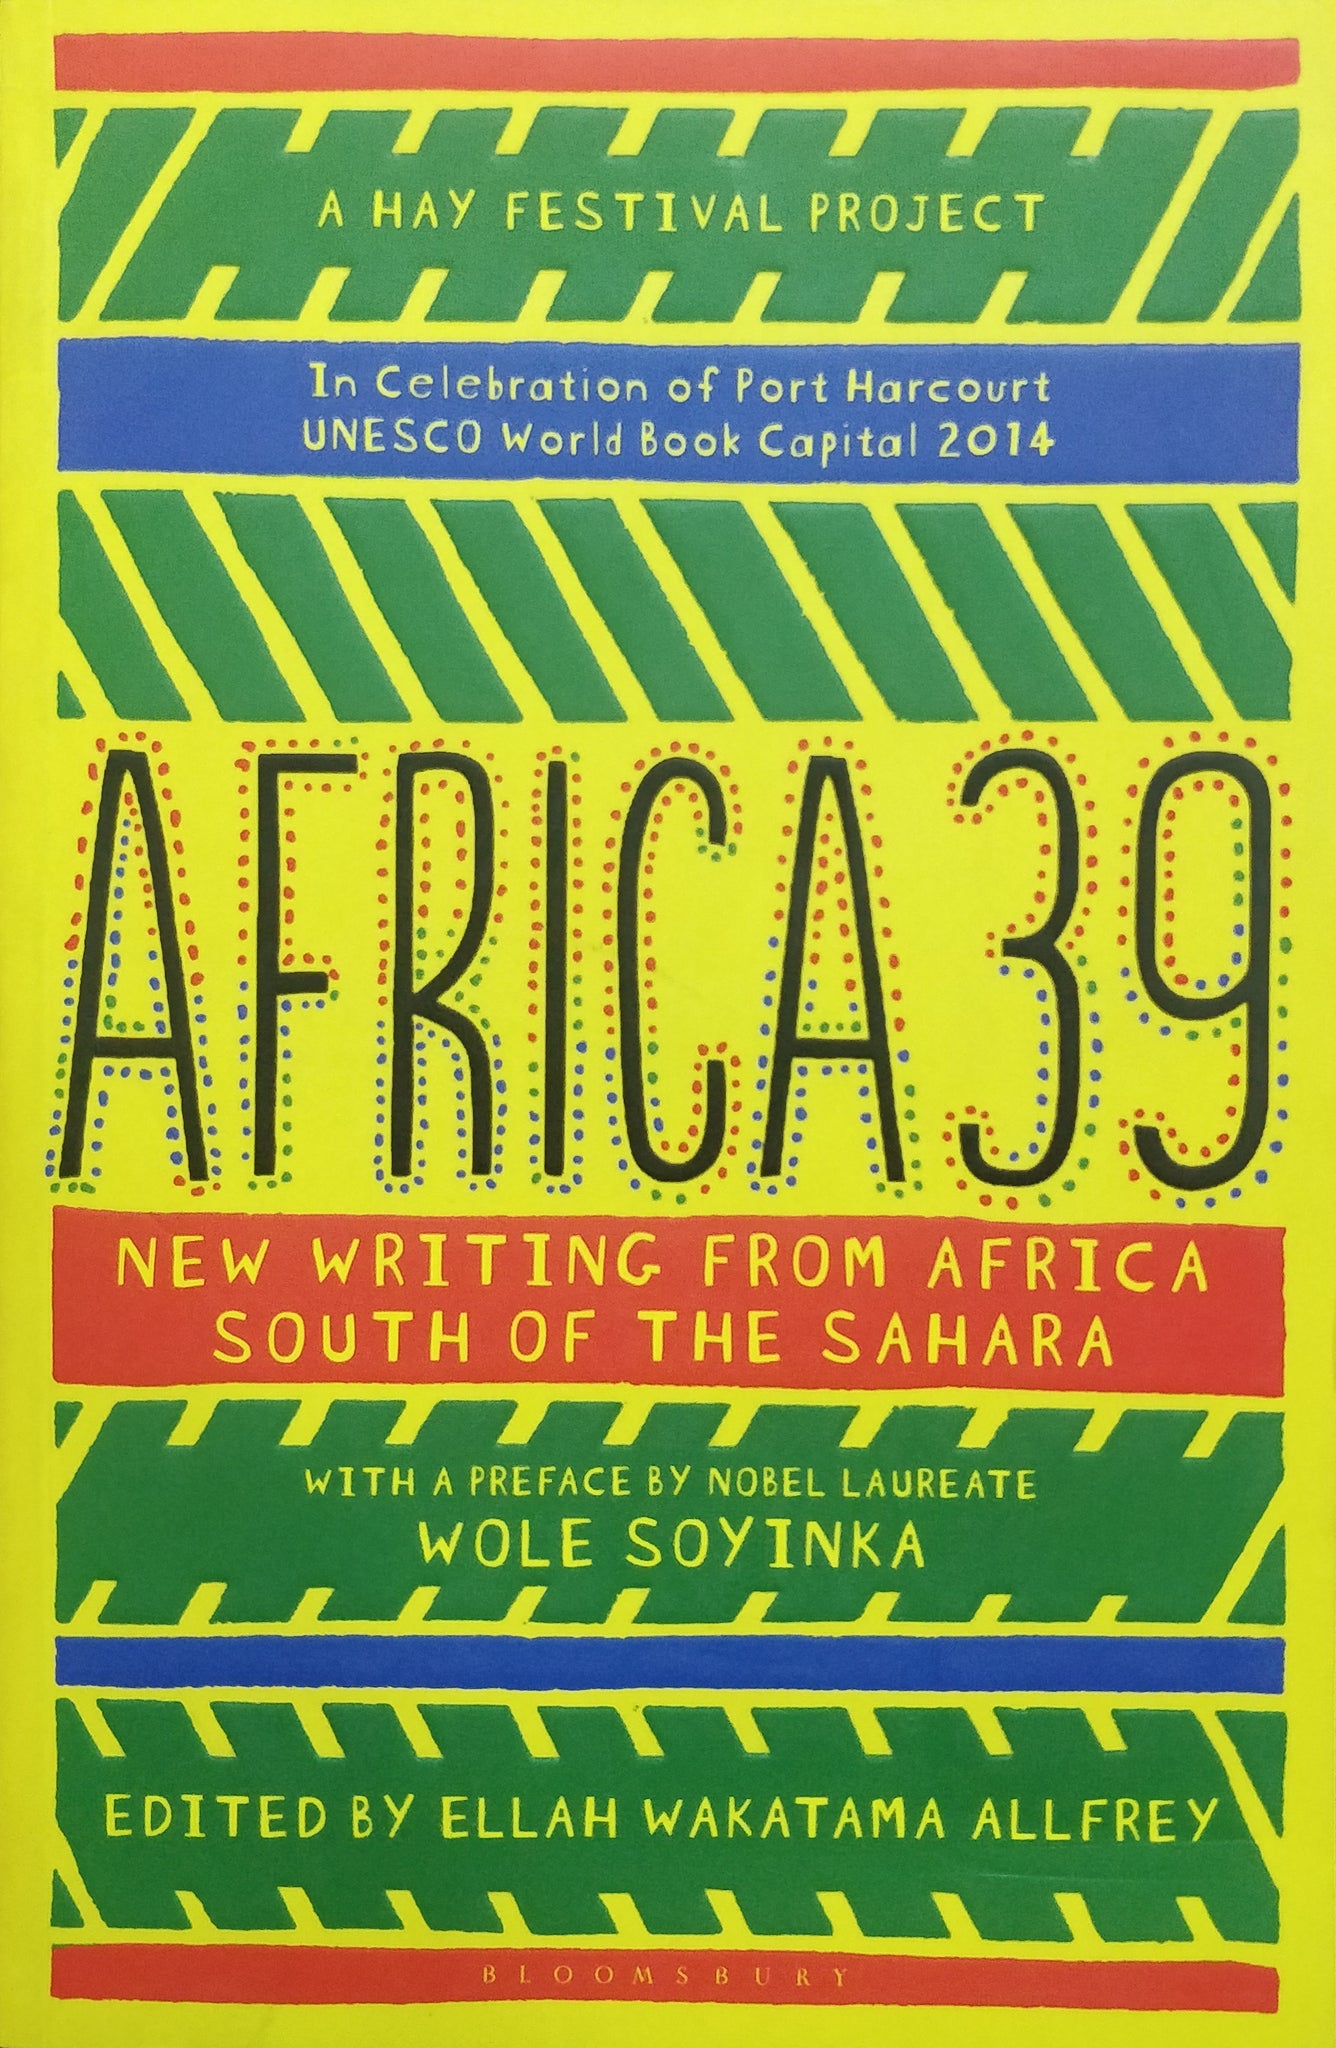 Africa39: New Writing from Africa South of the Sahara